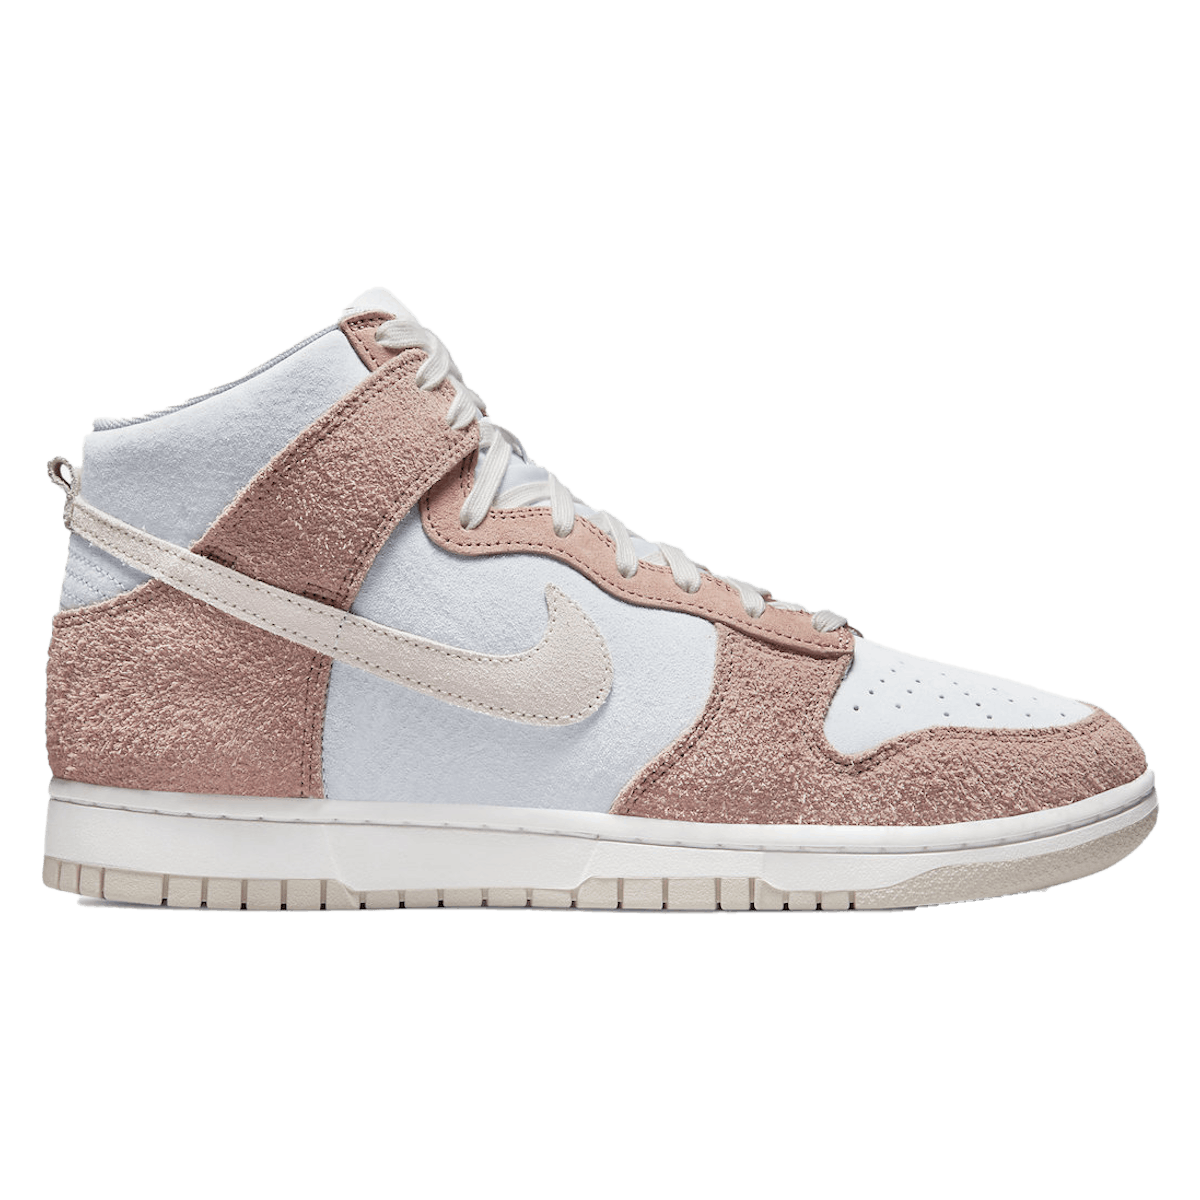 Nike Dunk High "Fossil Rose"